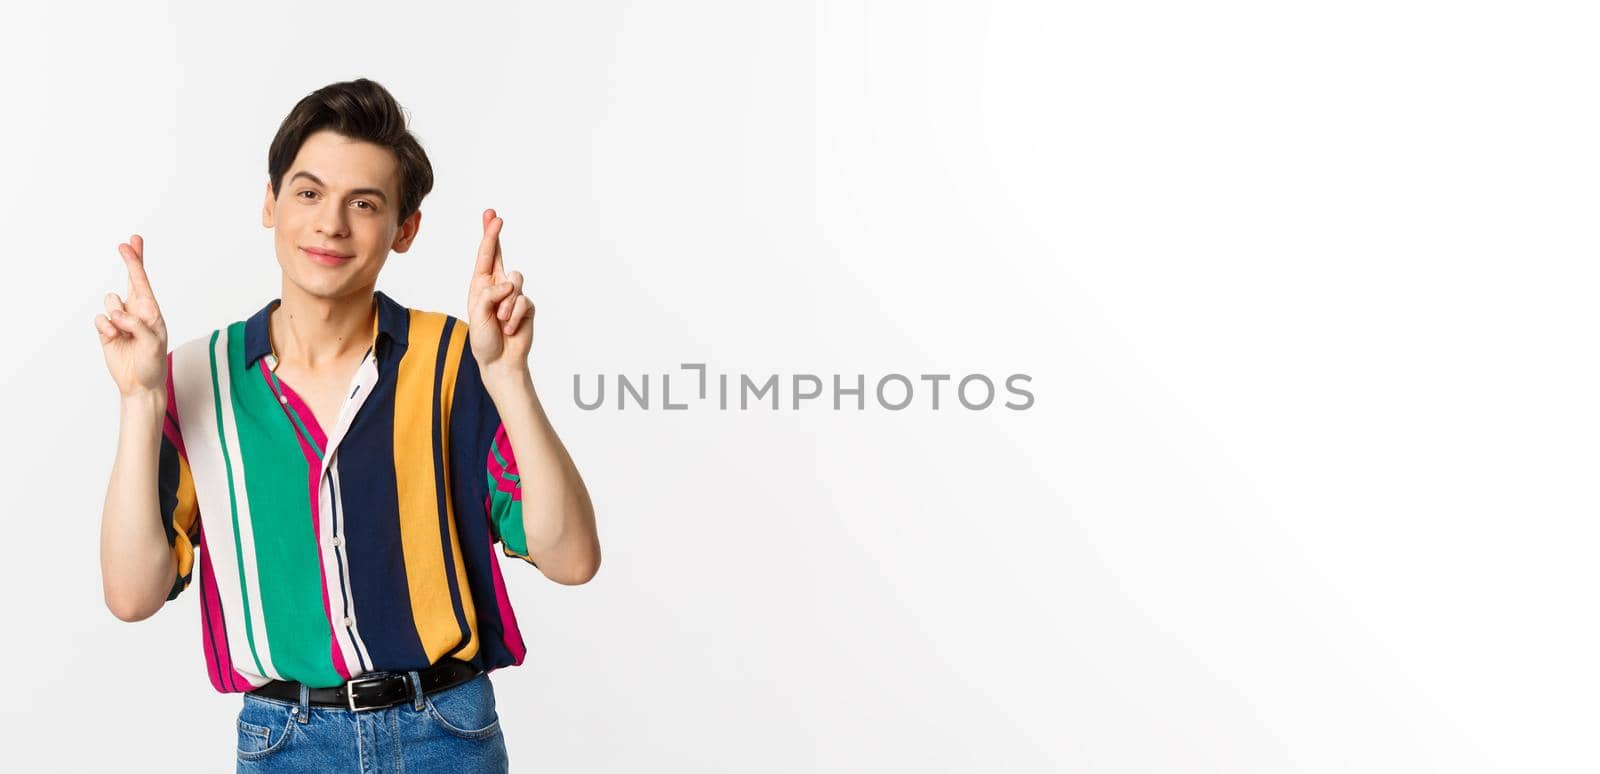 Optimistic young man smiling, holding fingers crossed for good luck, making wish, standing over white background. Copy space